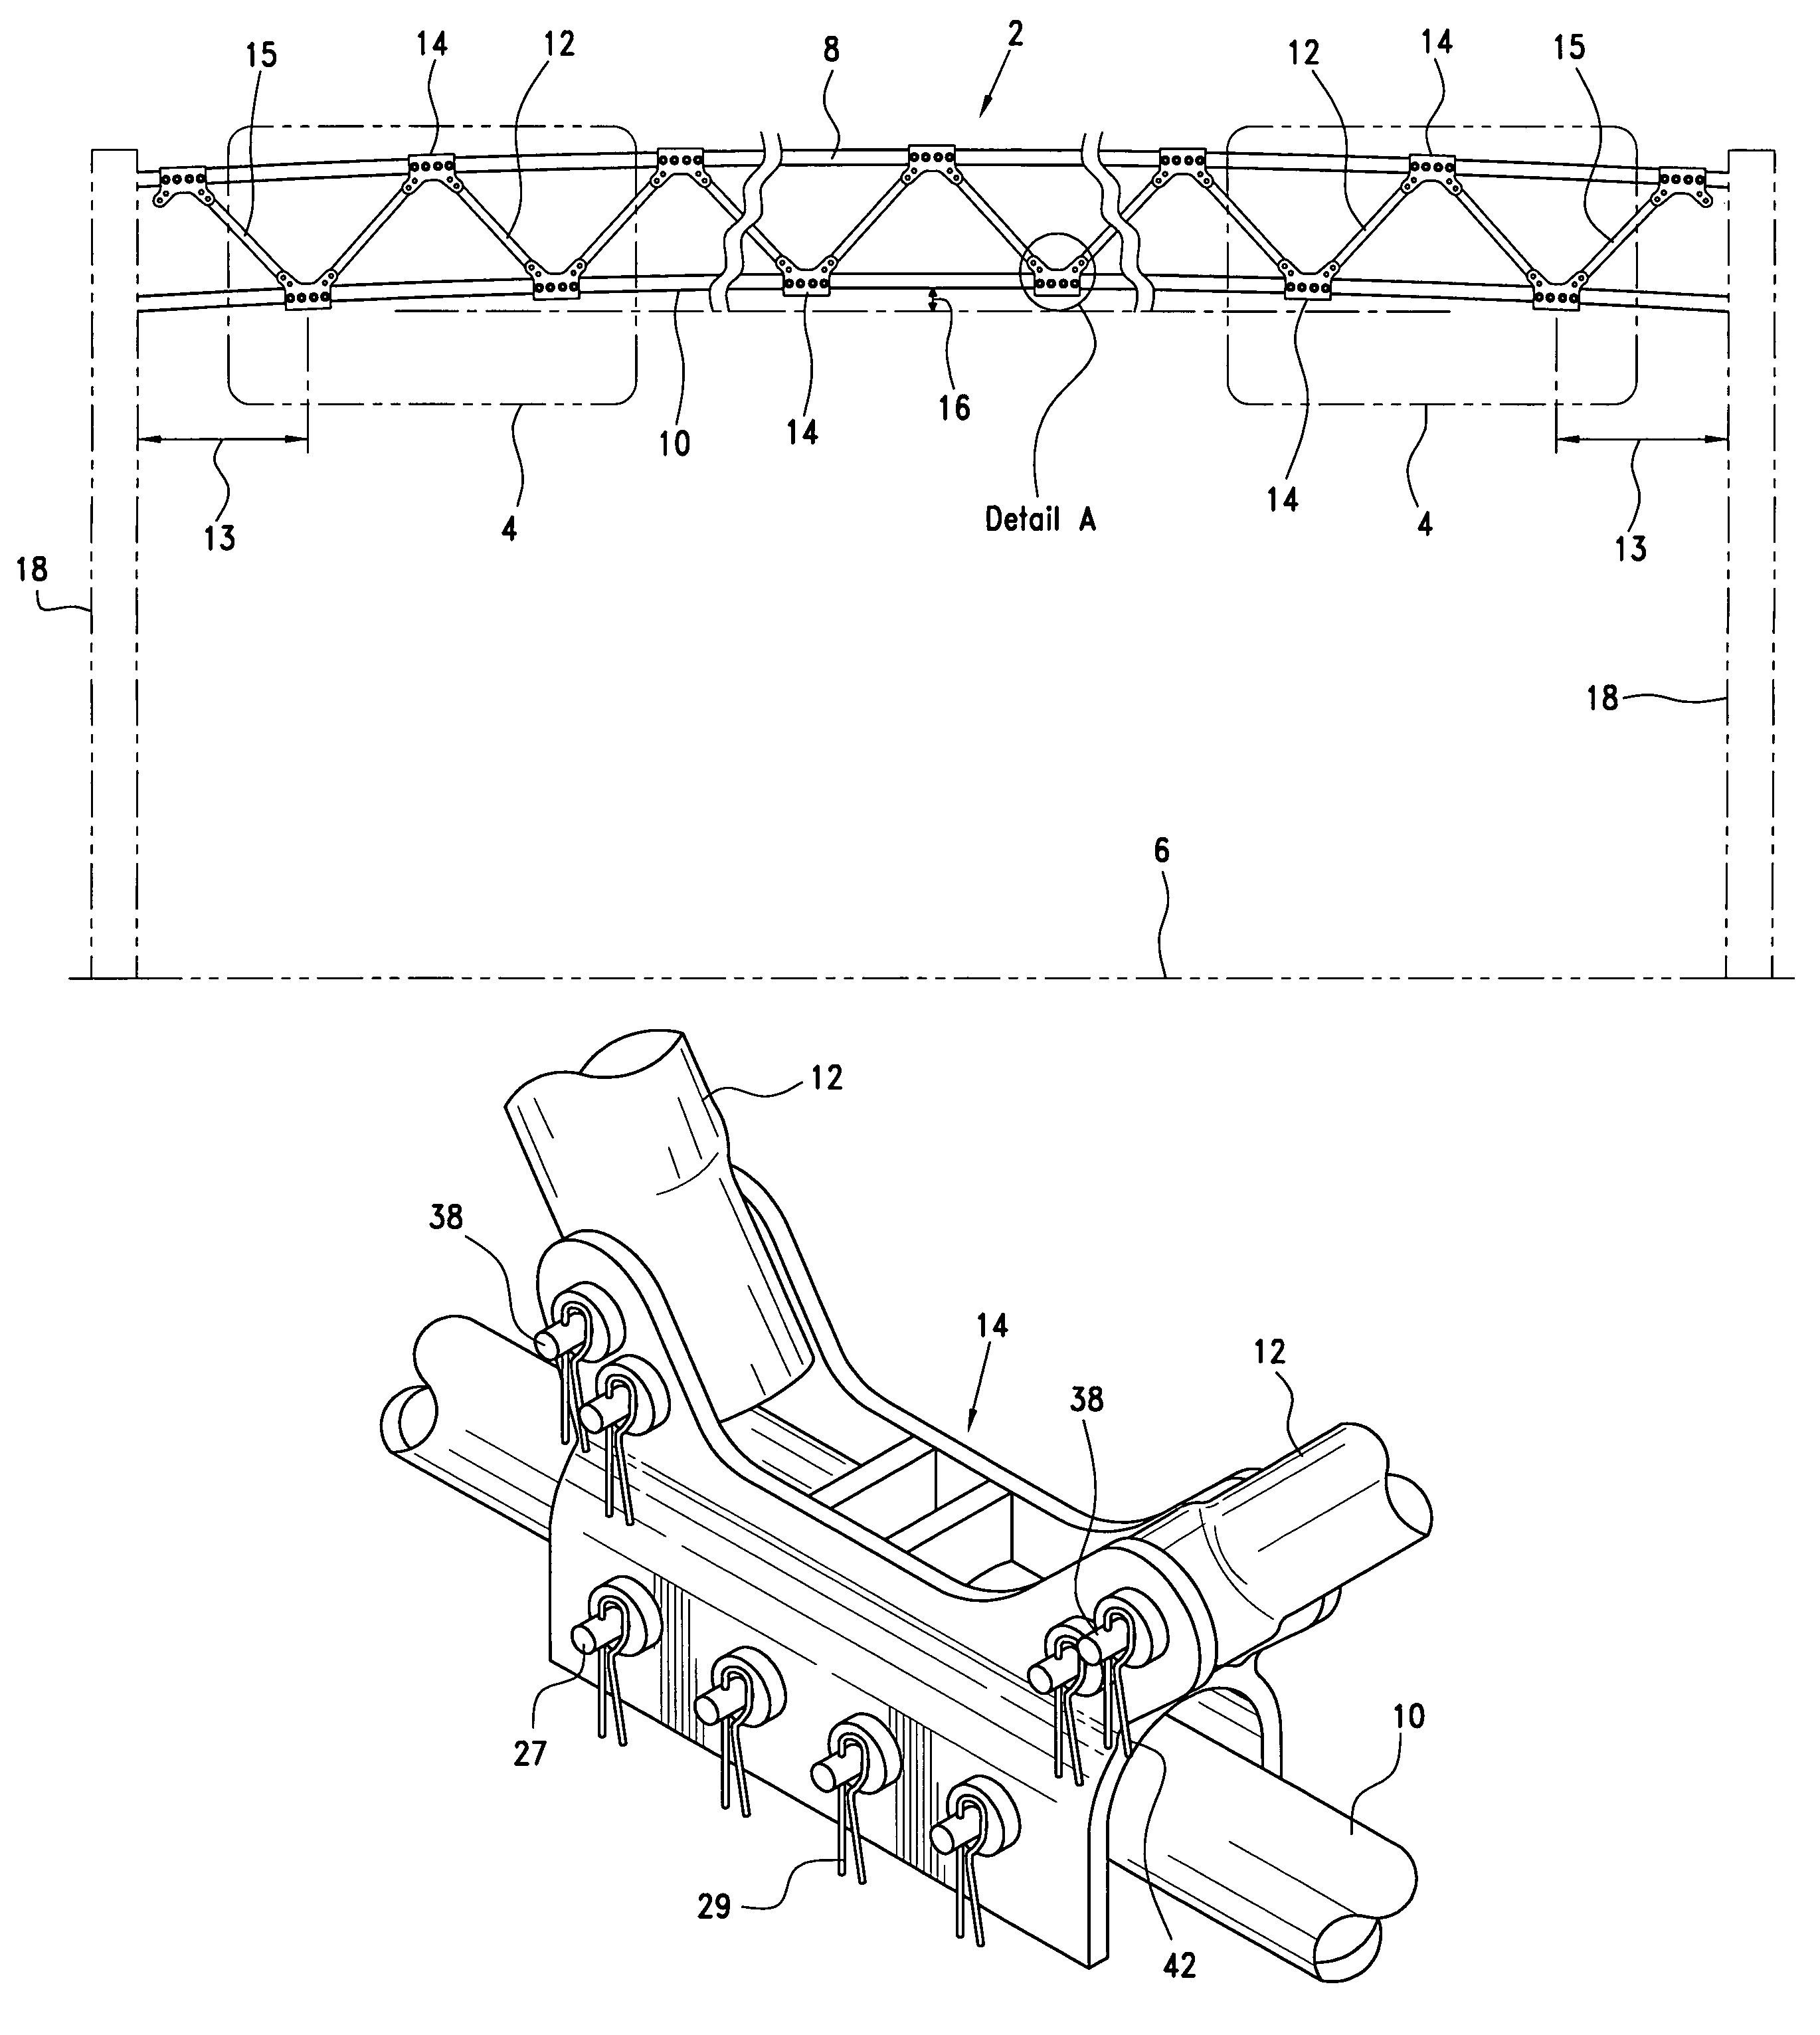 Space frame support structure employing weld-free, single-cast structural connectors for highway signs